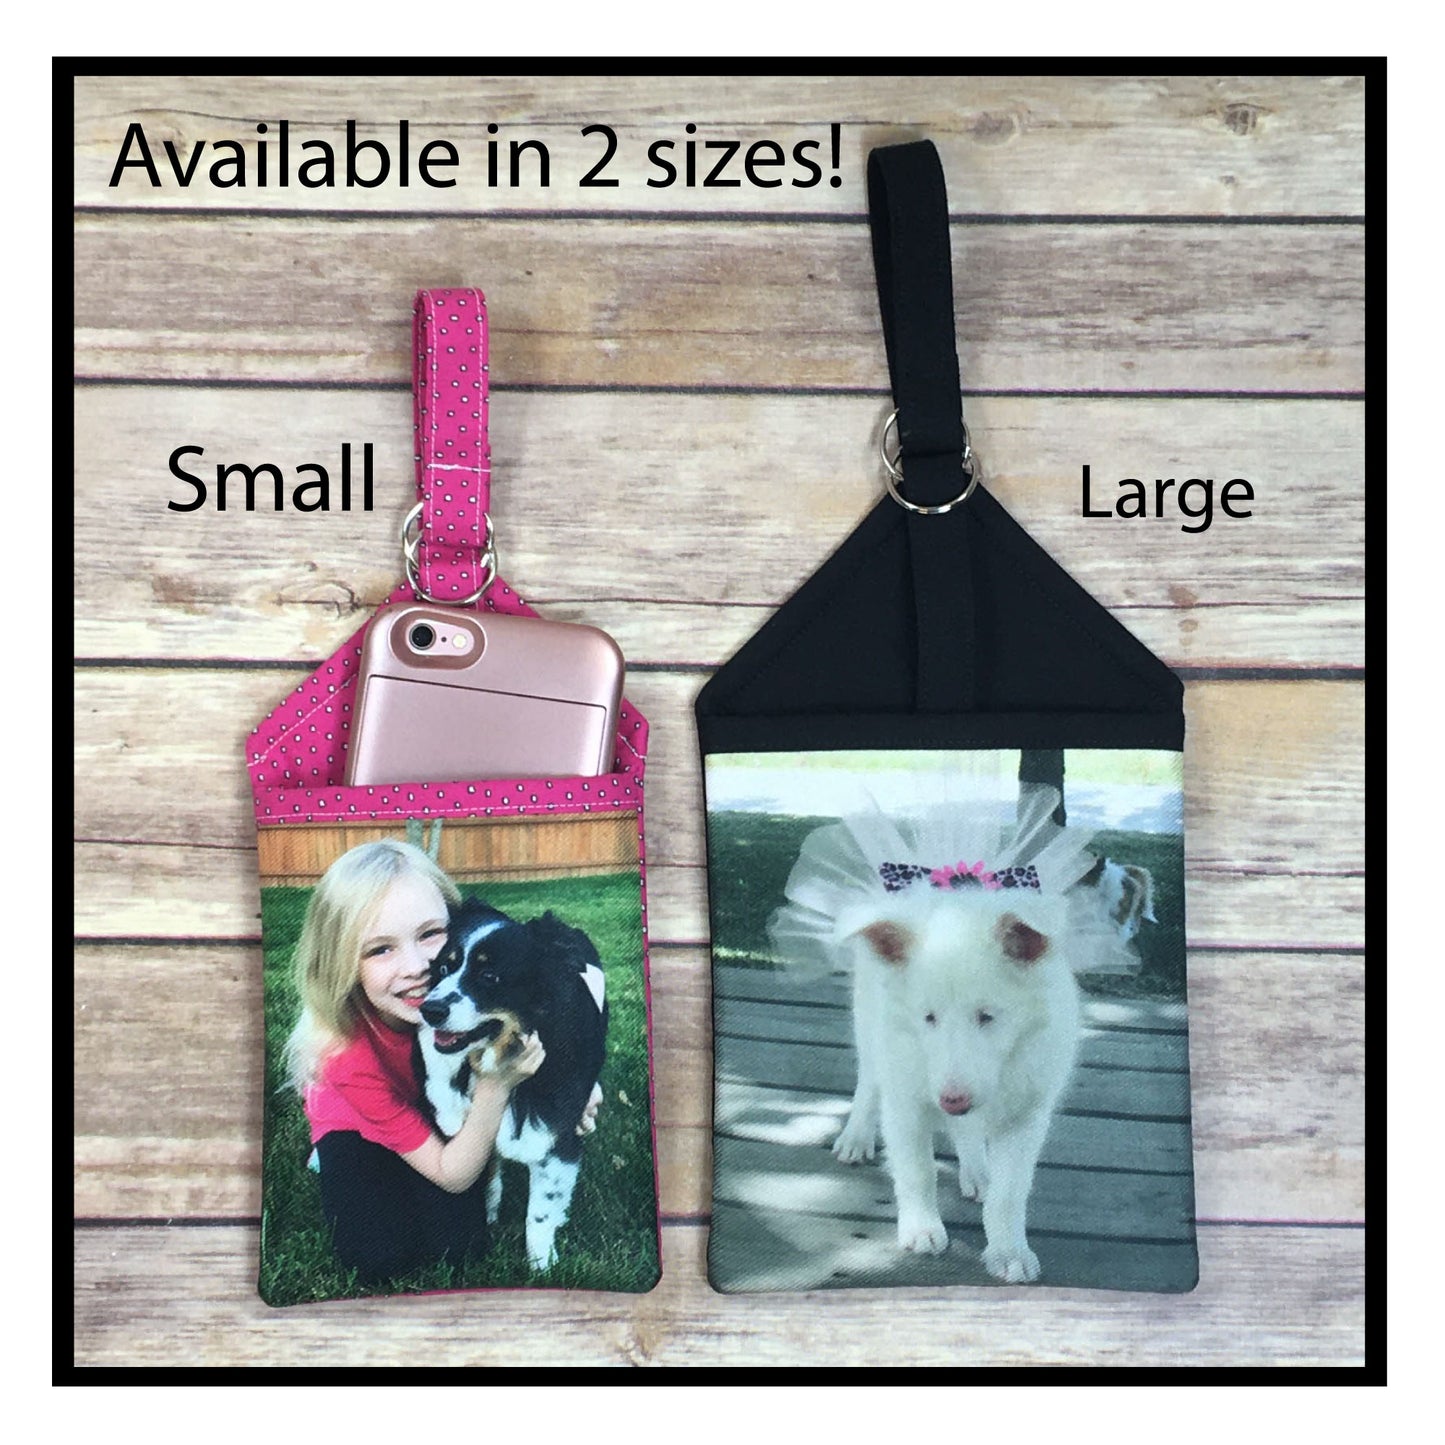 Small Cell Phone Pocket personalized with custom photo!